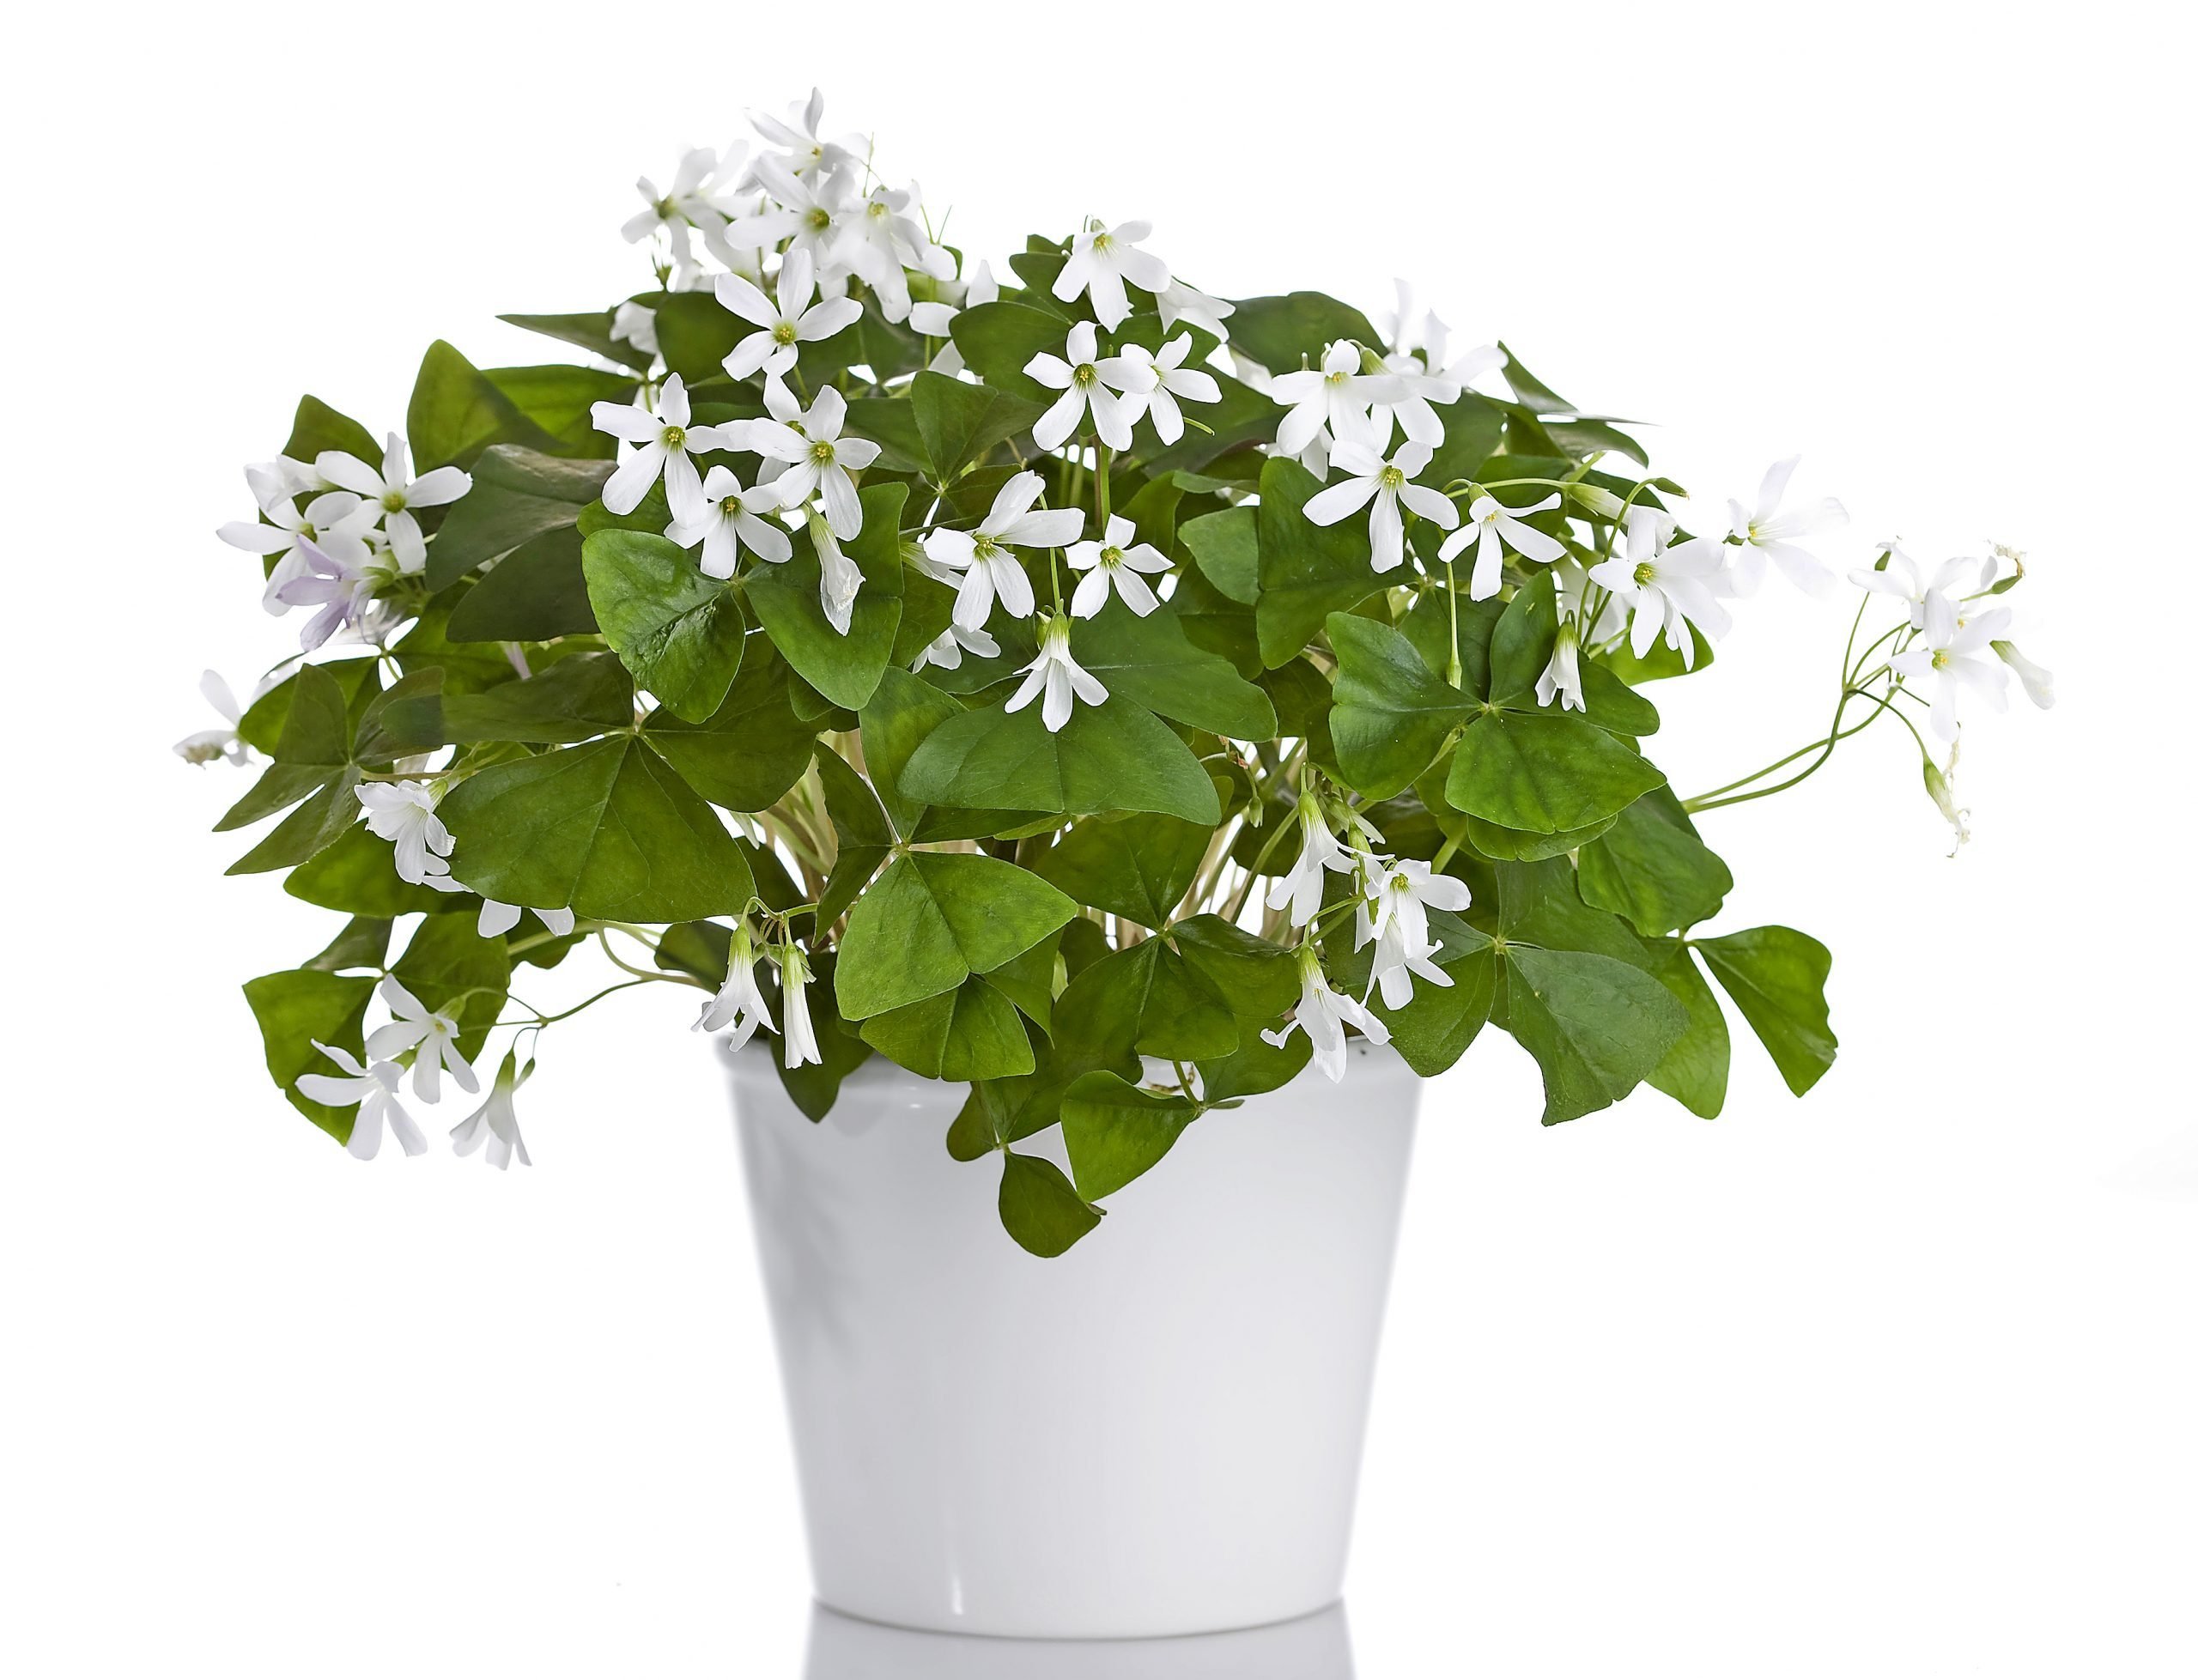 Grow a Lucky Charm: How to Care for a Shamrock Plant